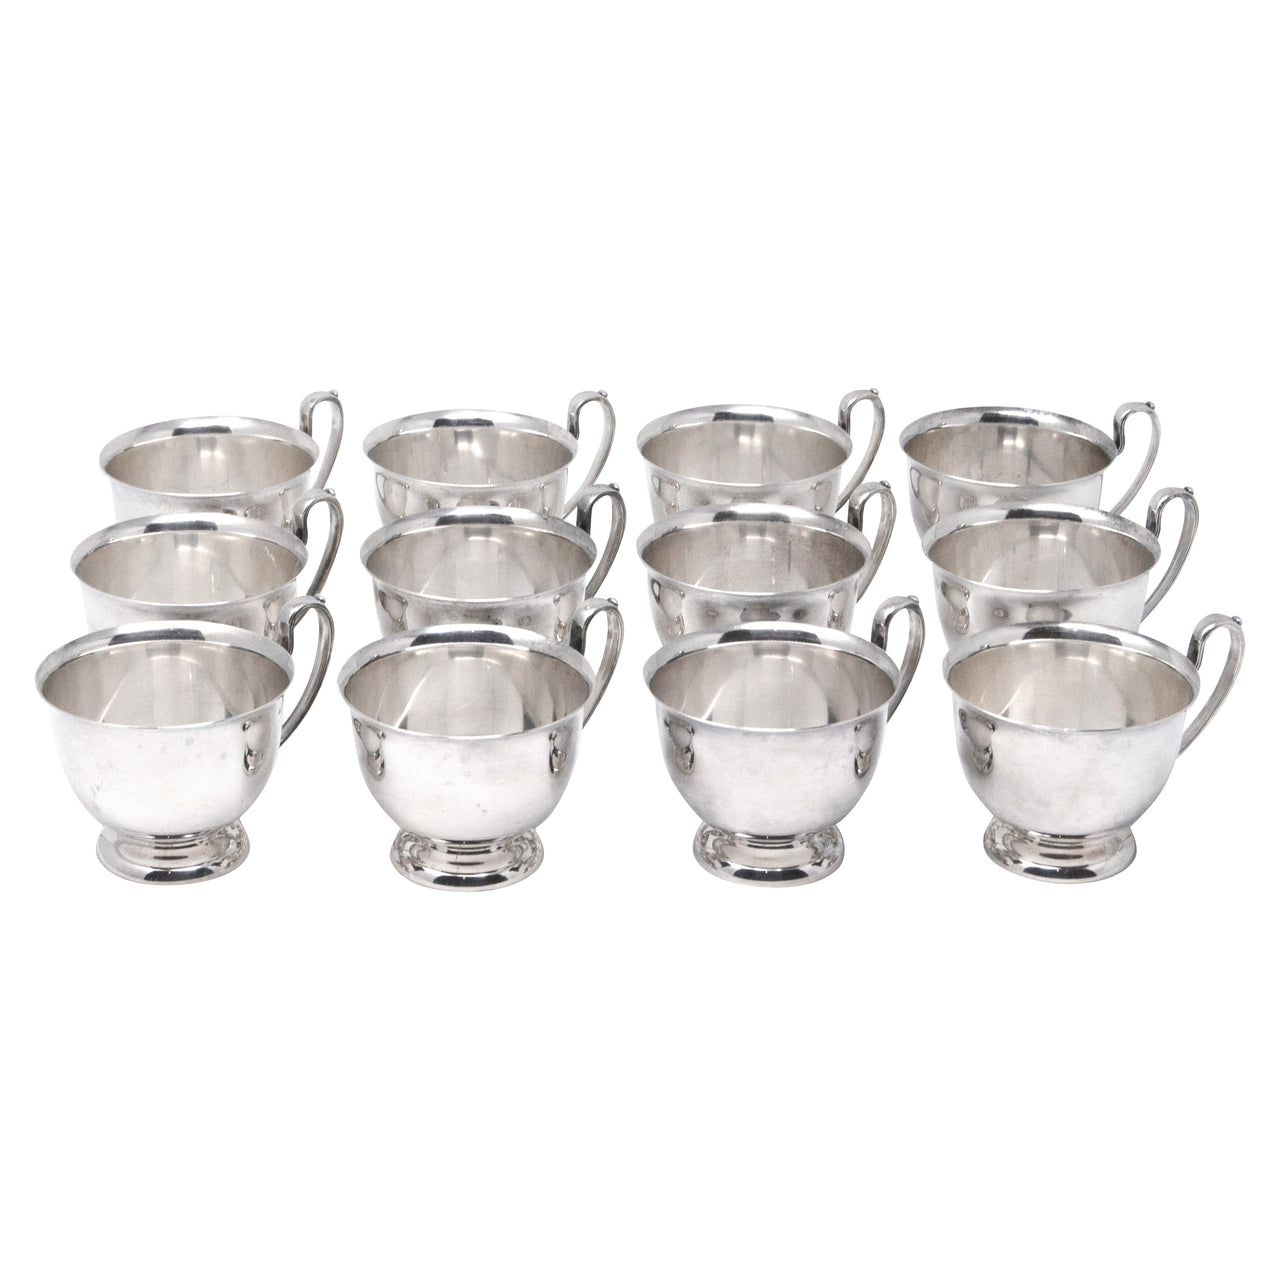 Vintage Crescent Silver Plate Punch Cups | The Hour Shop